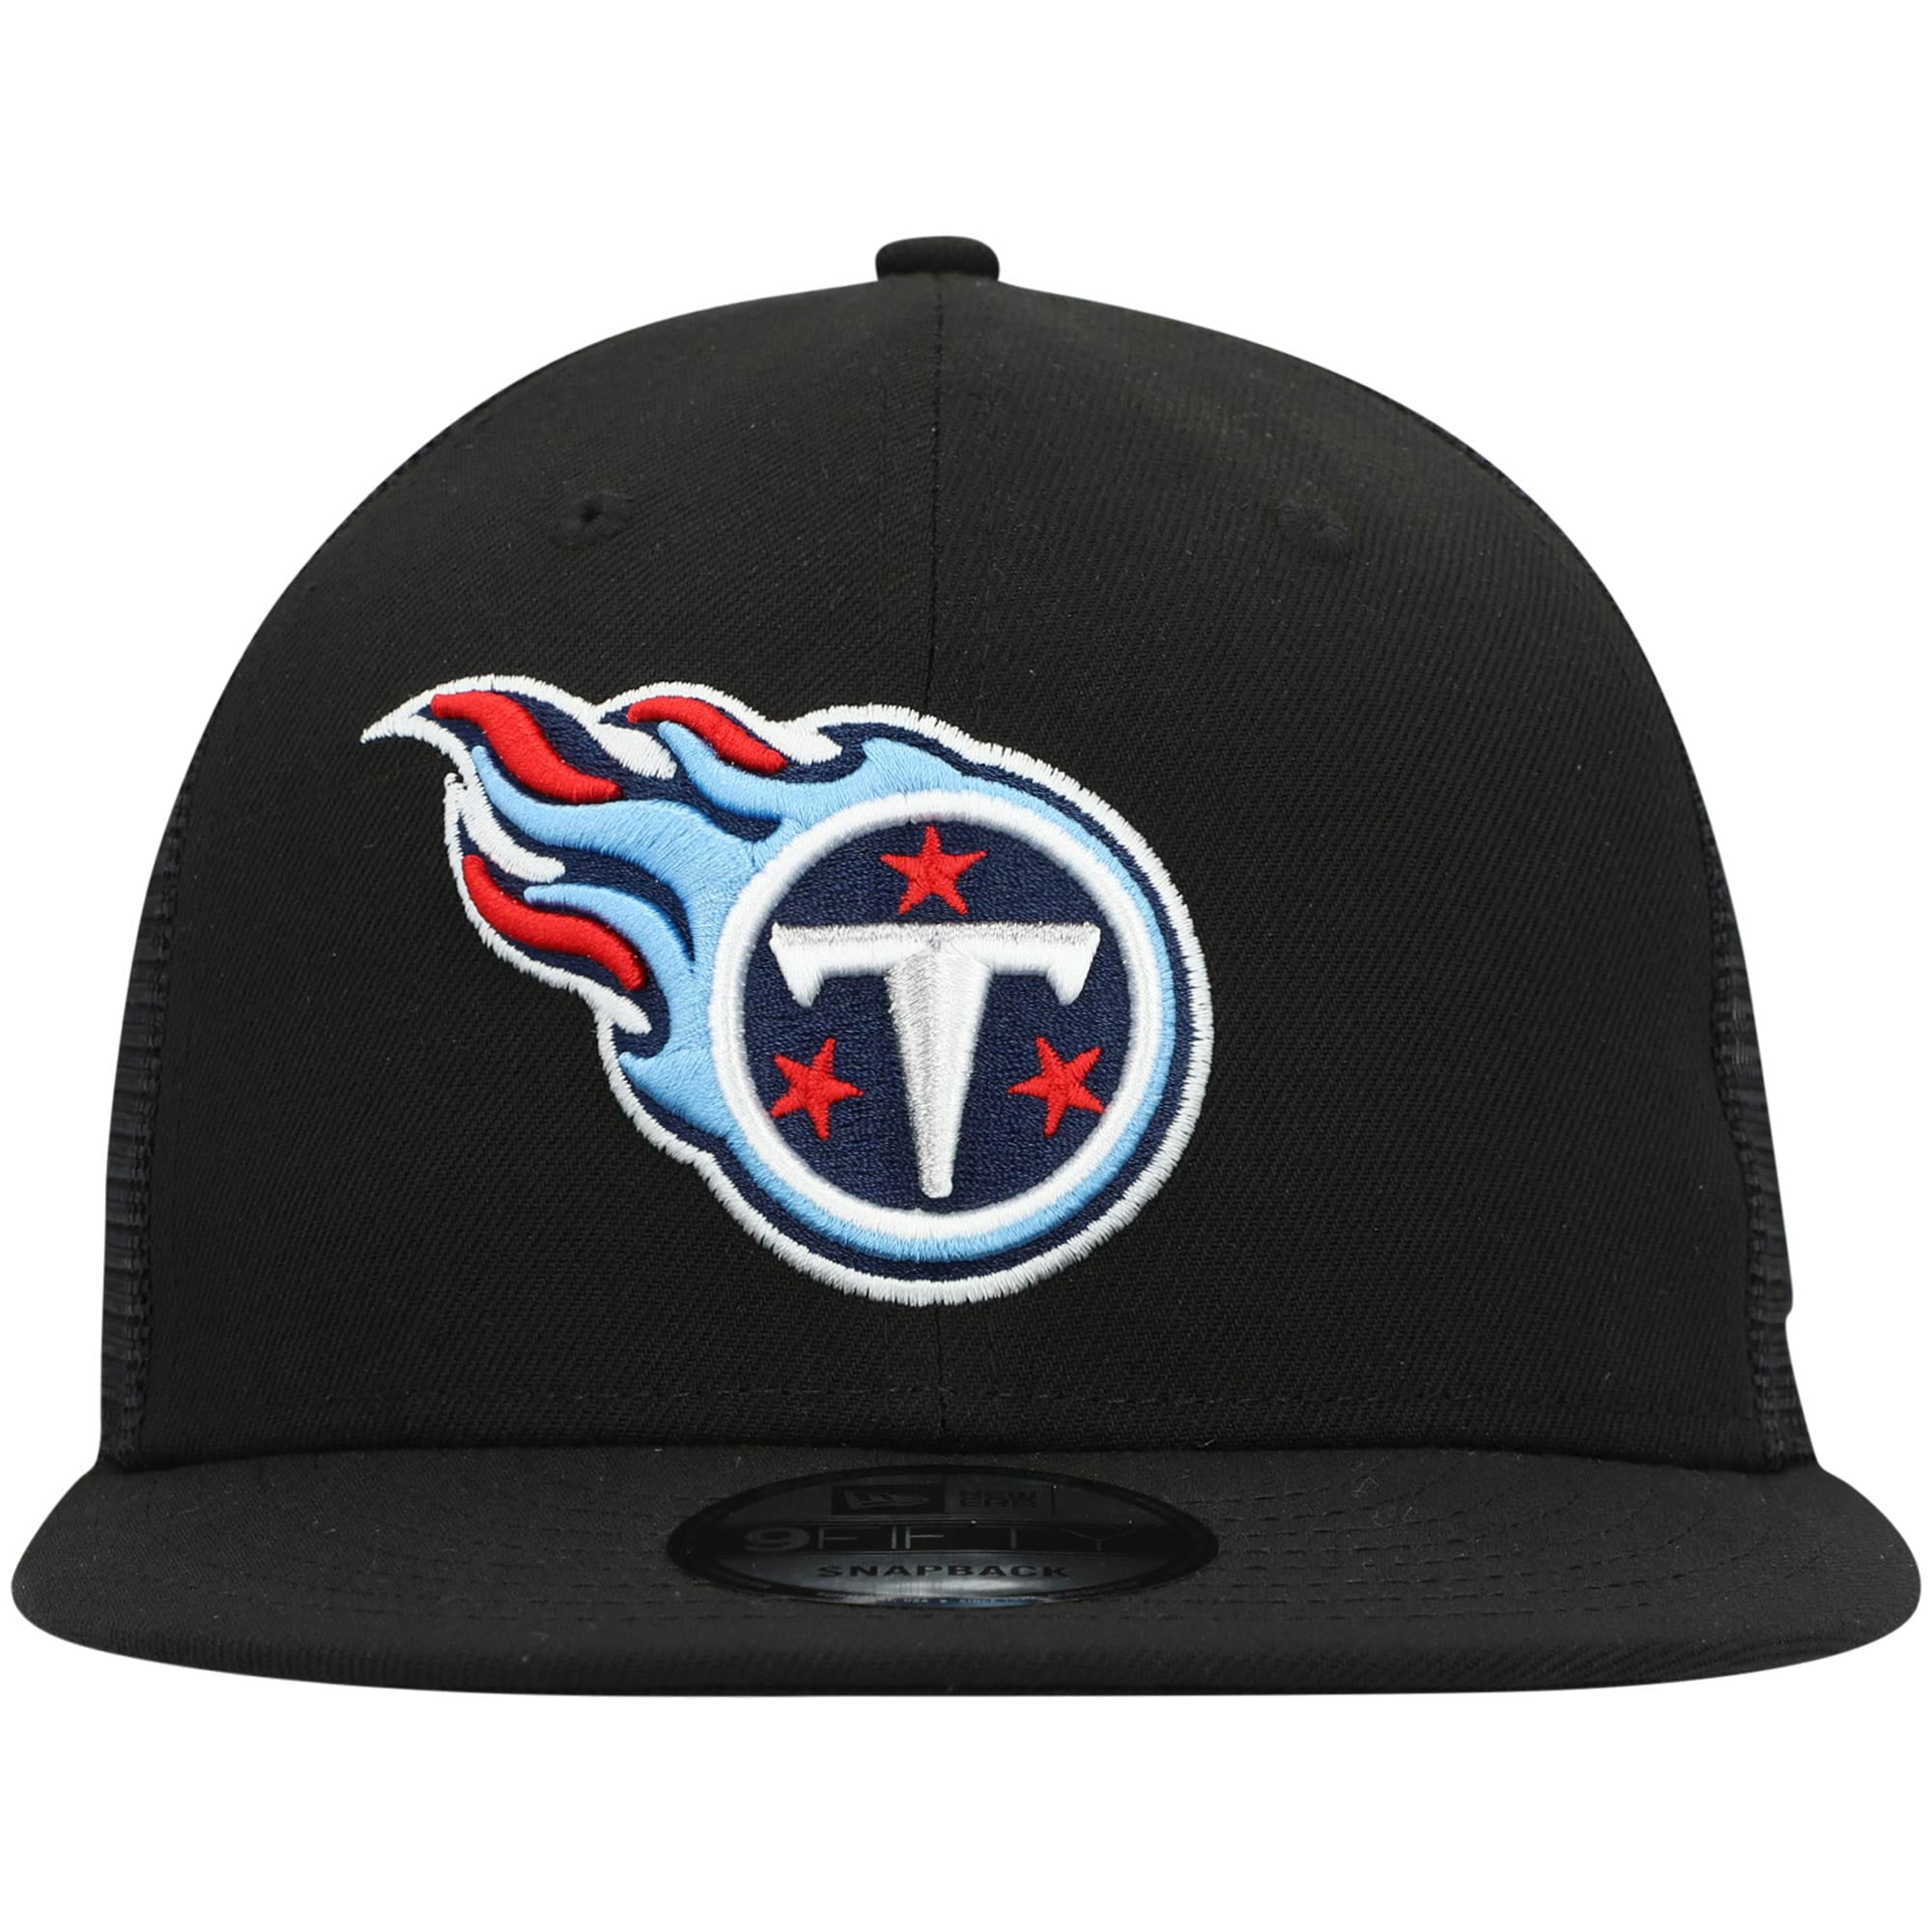 Throwback Tennessee Titans Mesh 9Fifty Snapback Cap wood 